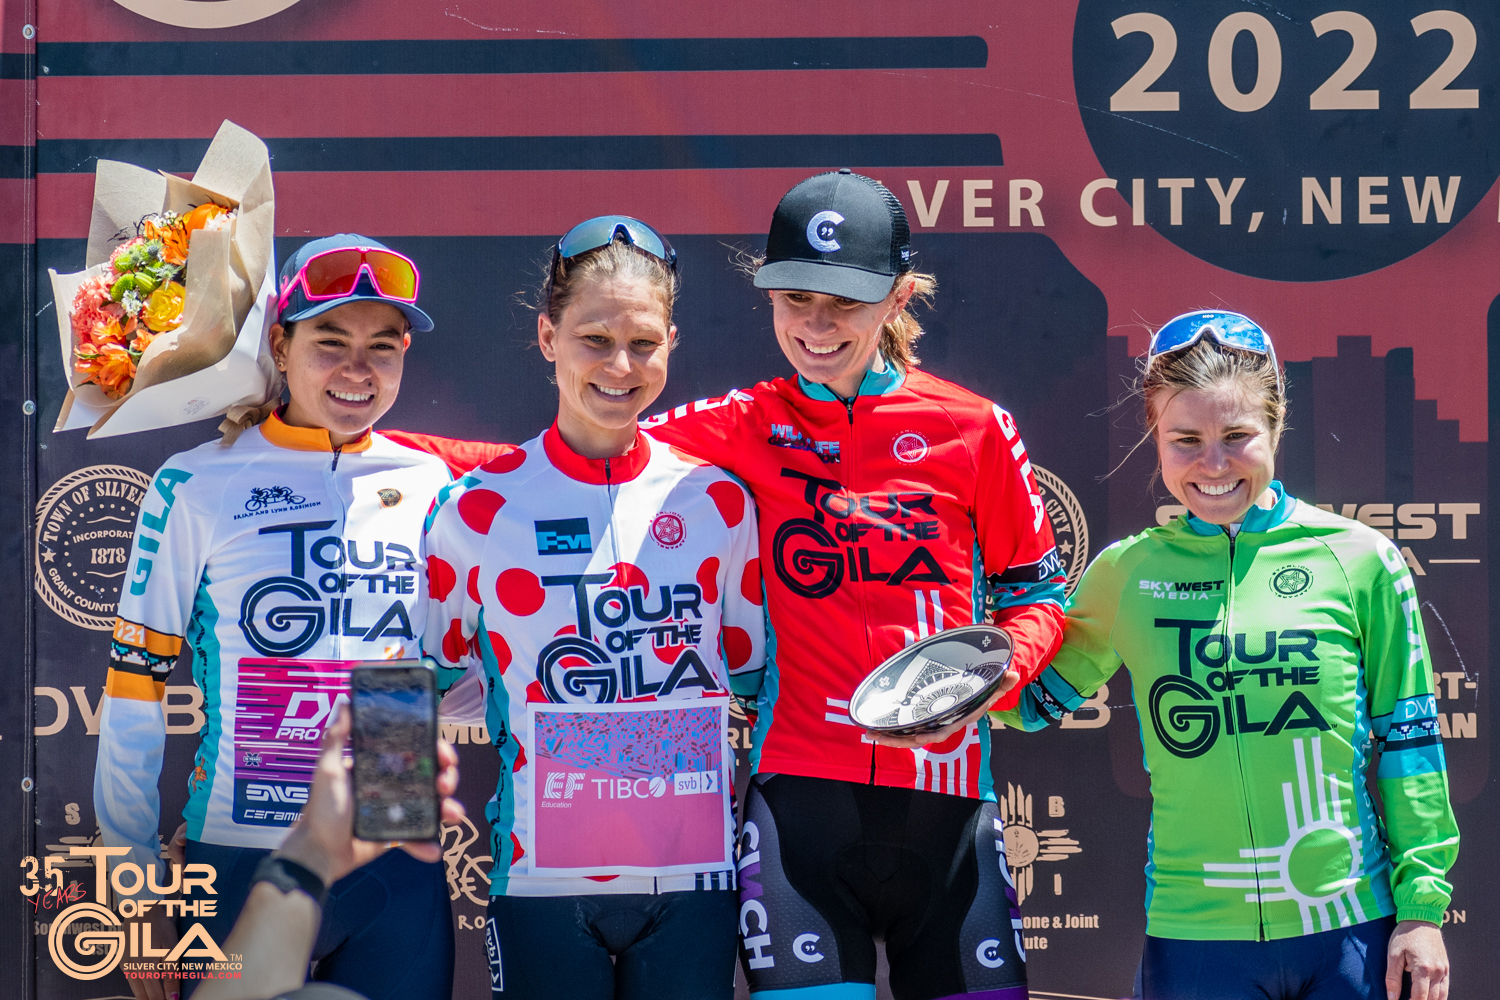 From learning how to walk to winning the Gila Lauren De Crescenzo